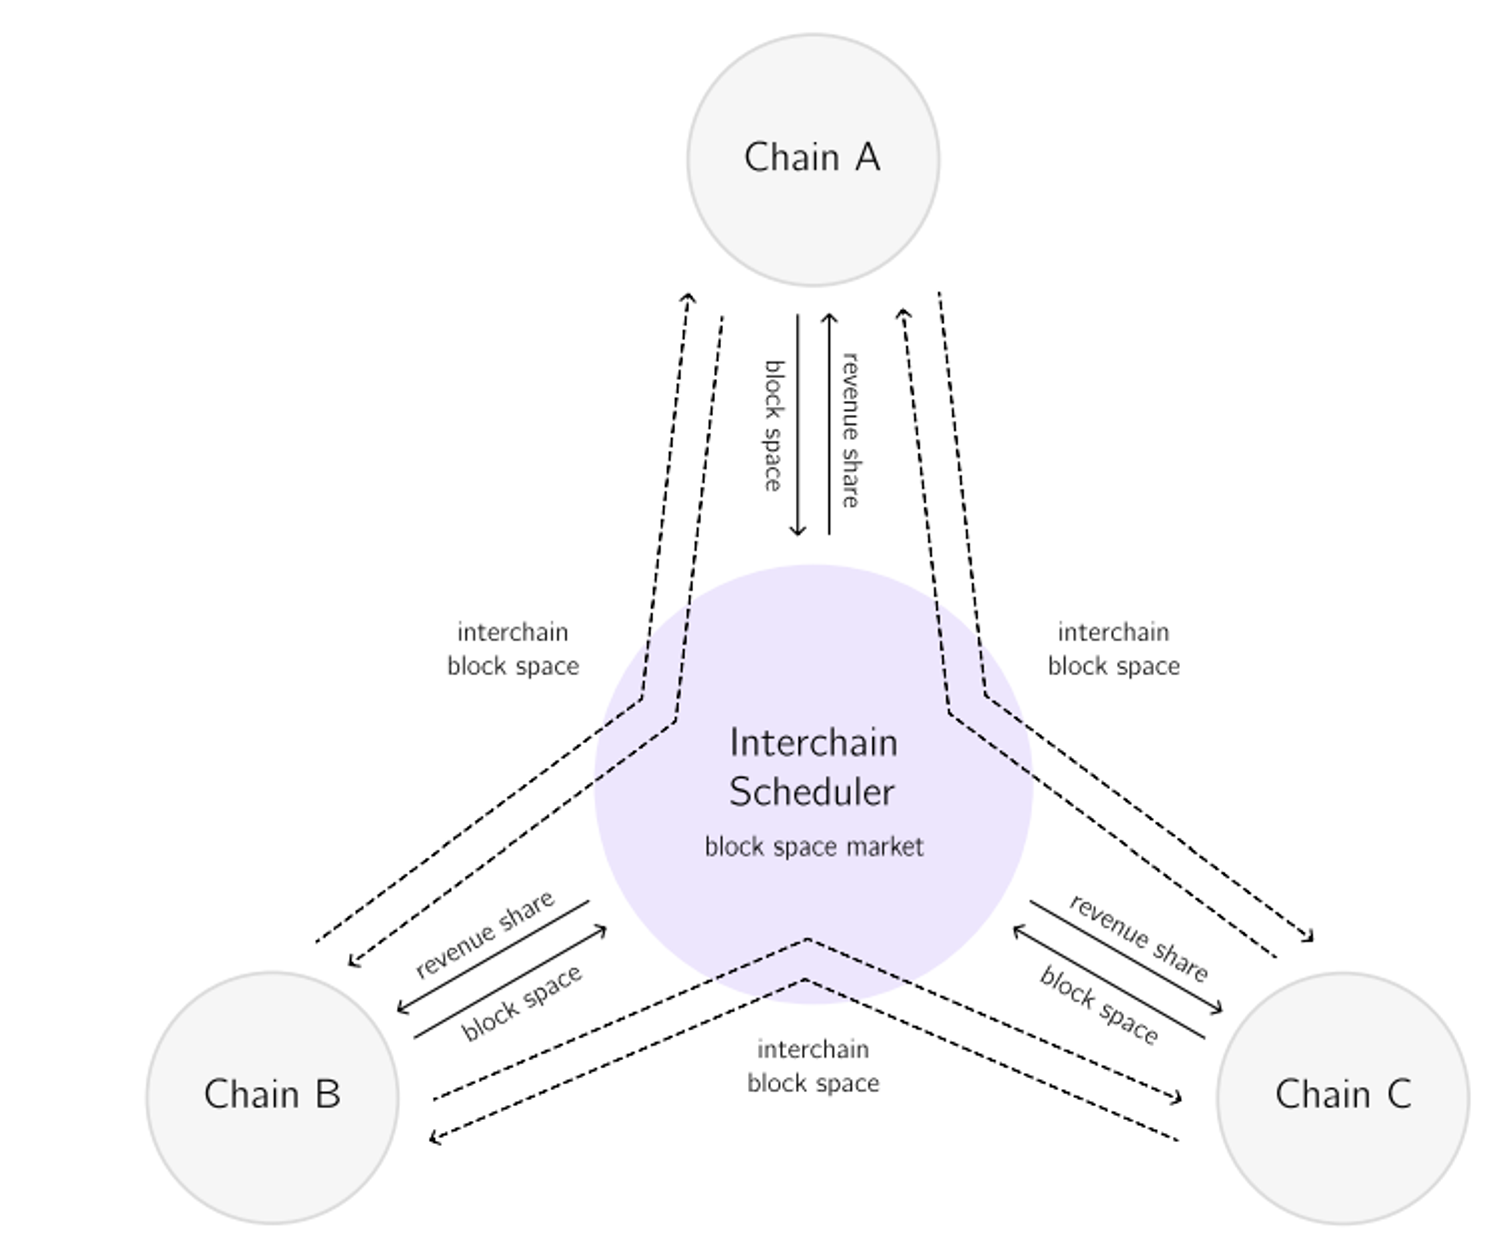 From ATOM 2.0 paper, ‘The Scheduler creates an in-protocol market for interchain block space, allowing chains to specify allowable MEV. Unlike other solutions that only split revenues with validators, the Scheduler also splits revenues with consumer chains’